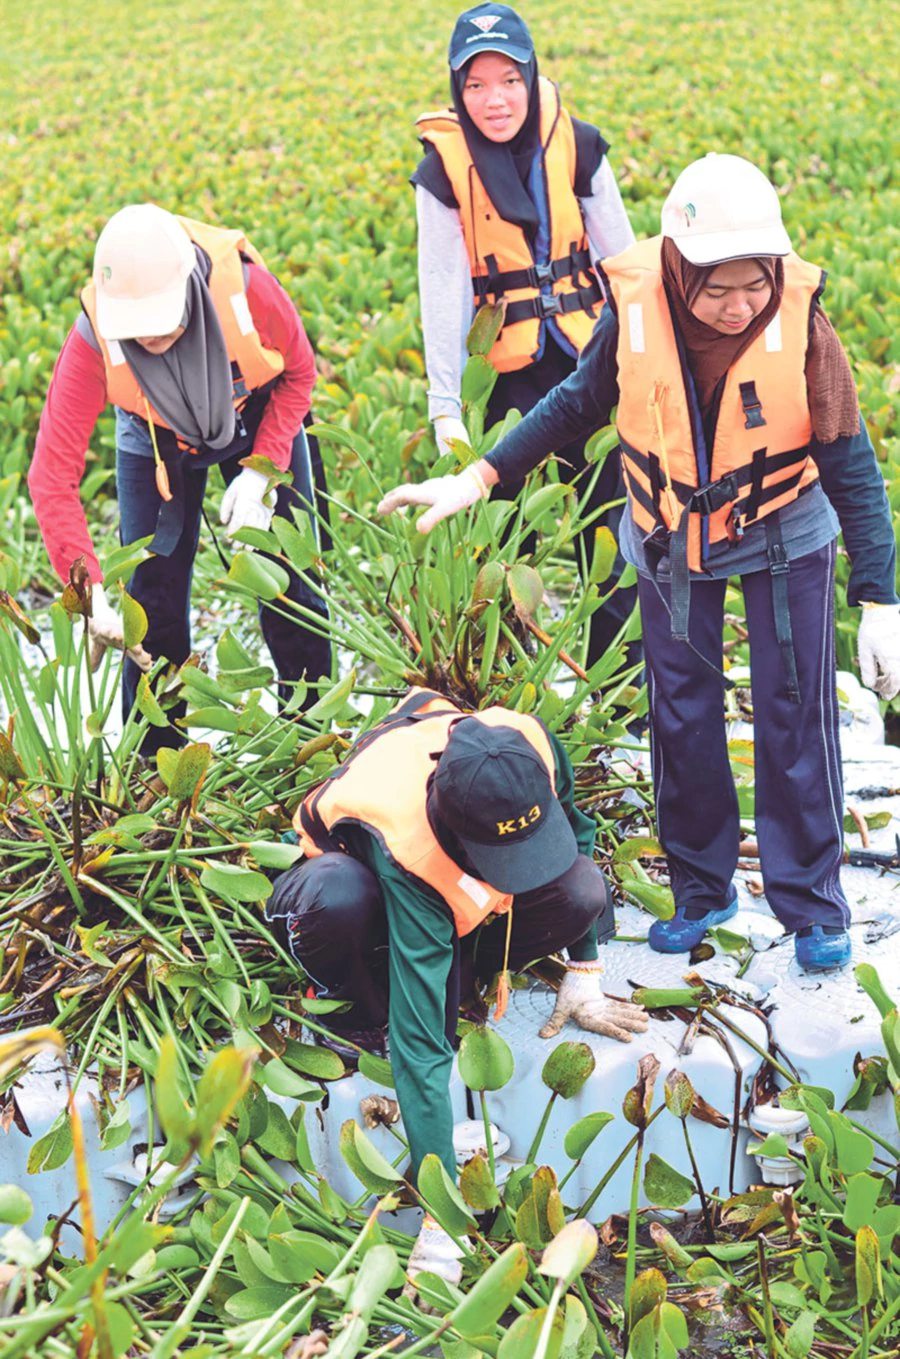 Removing water hyacinths after the weeding process.